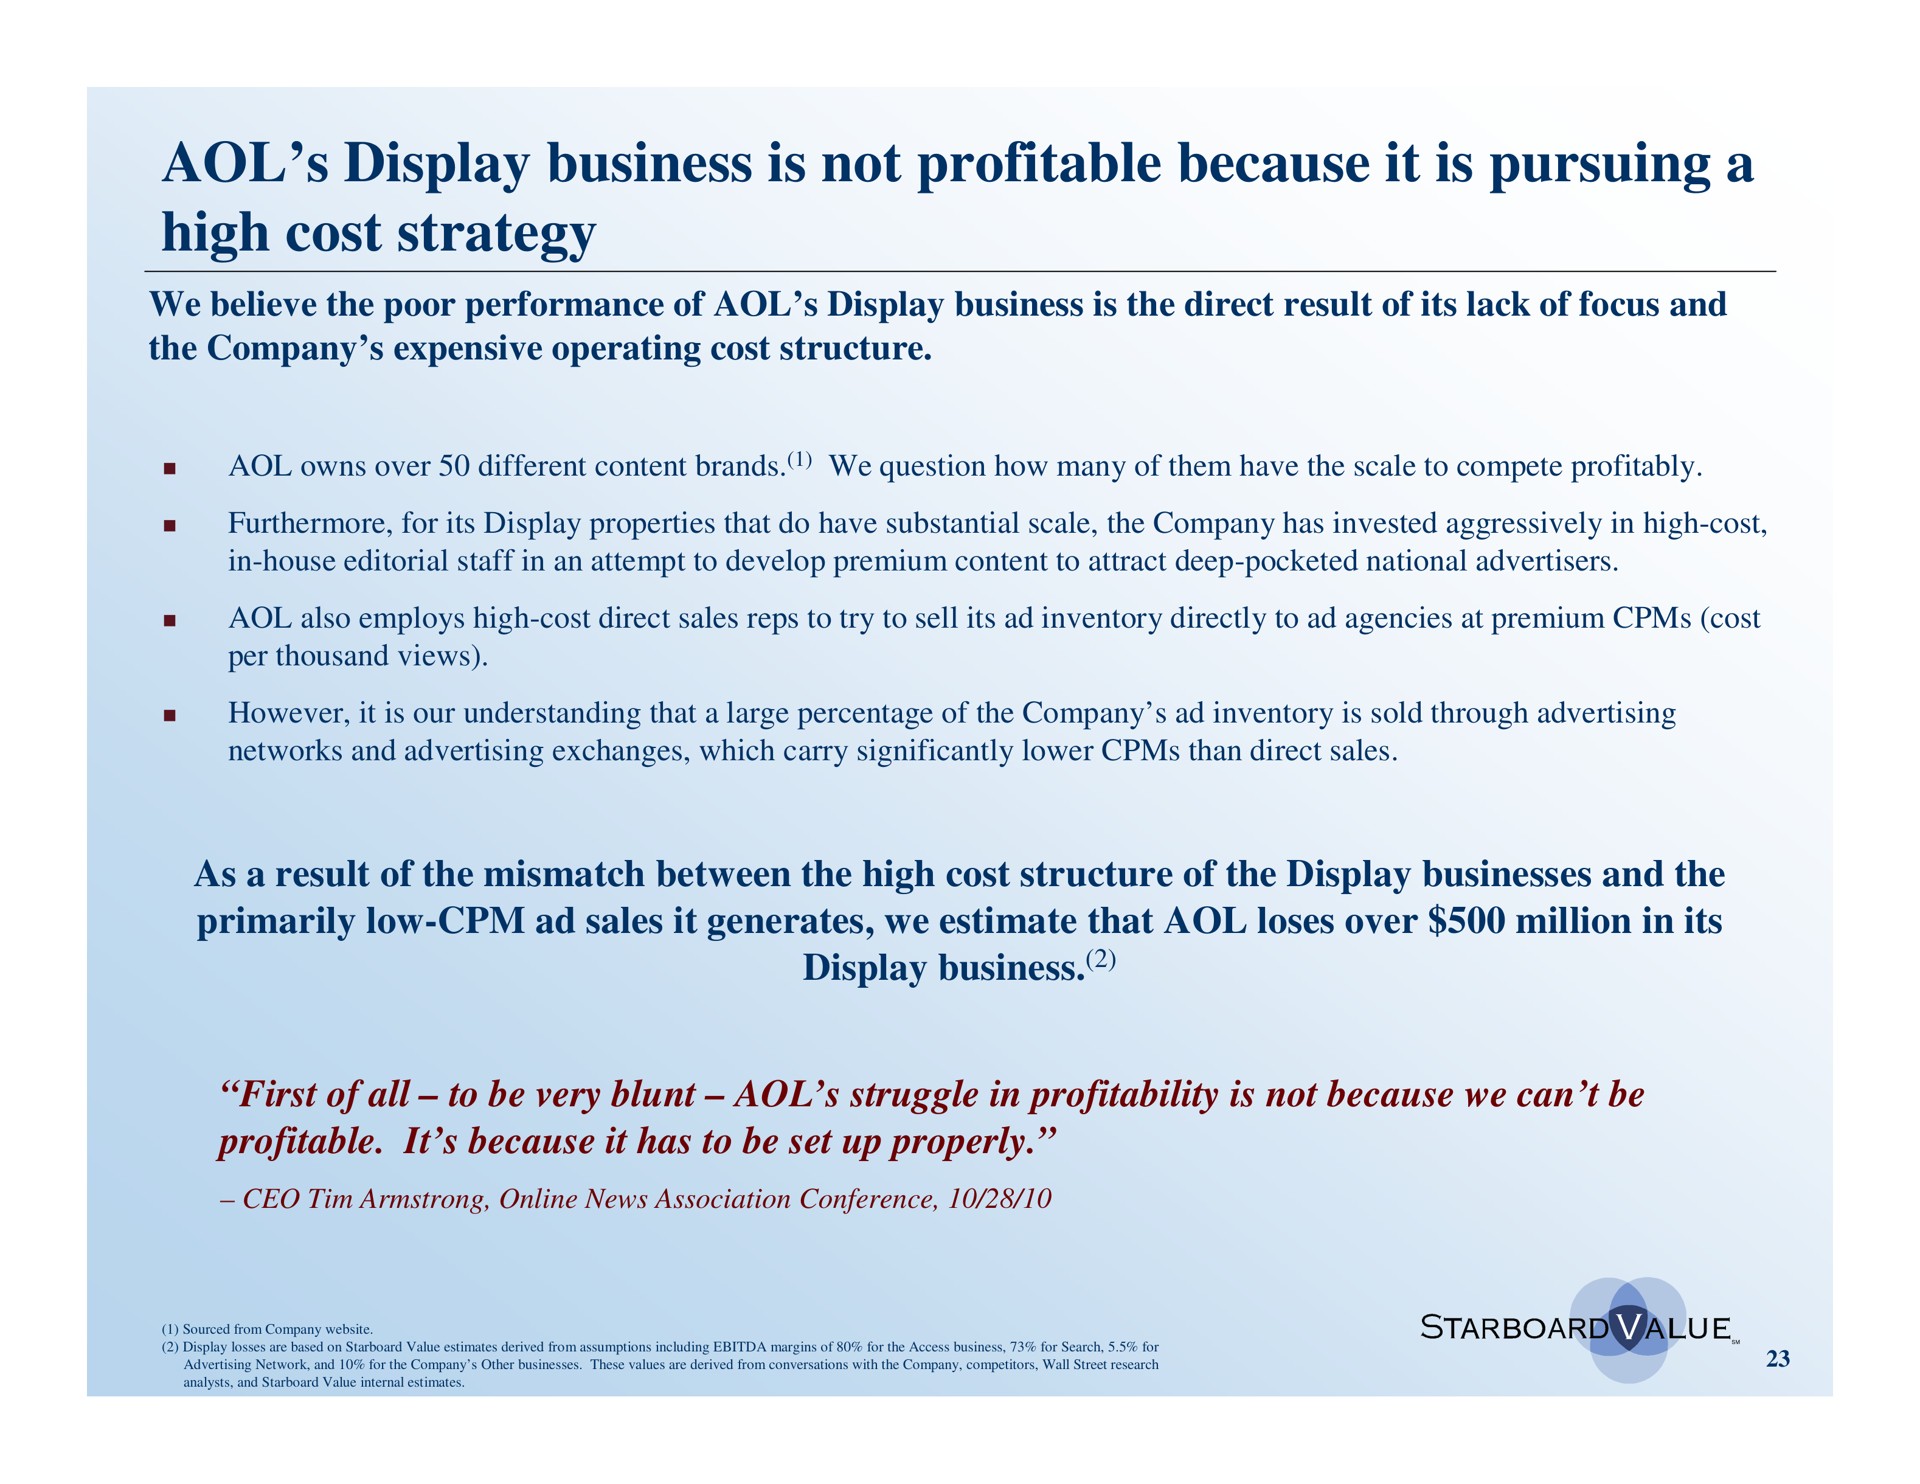 display business is not profitable because it is pursuing a high cost strategy | Starboard Value